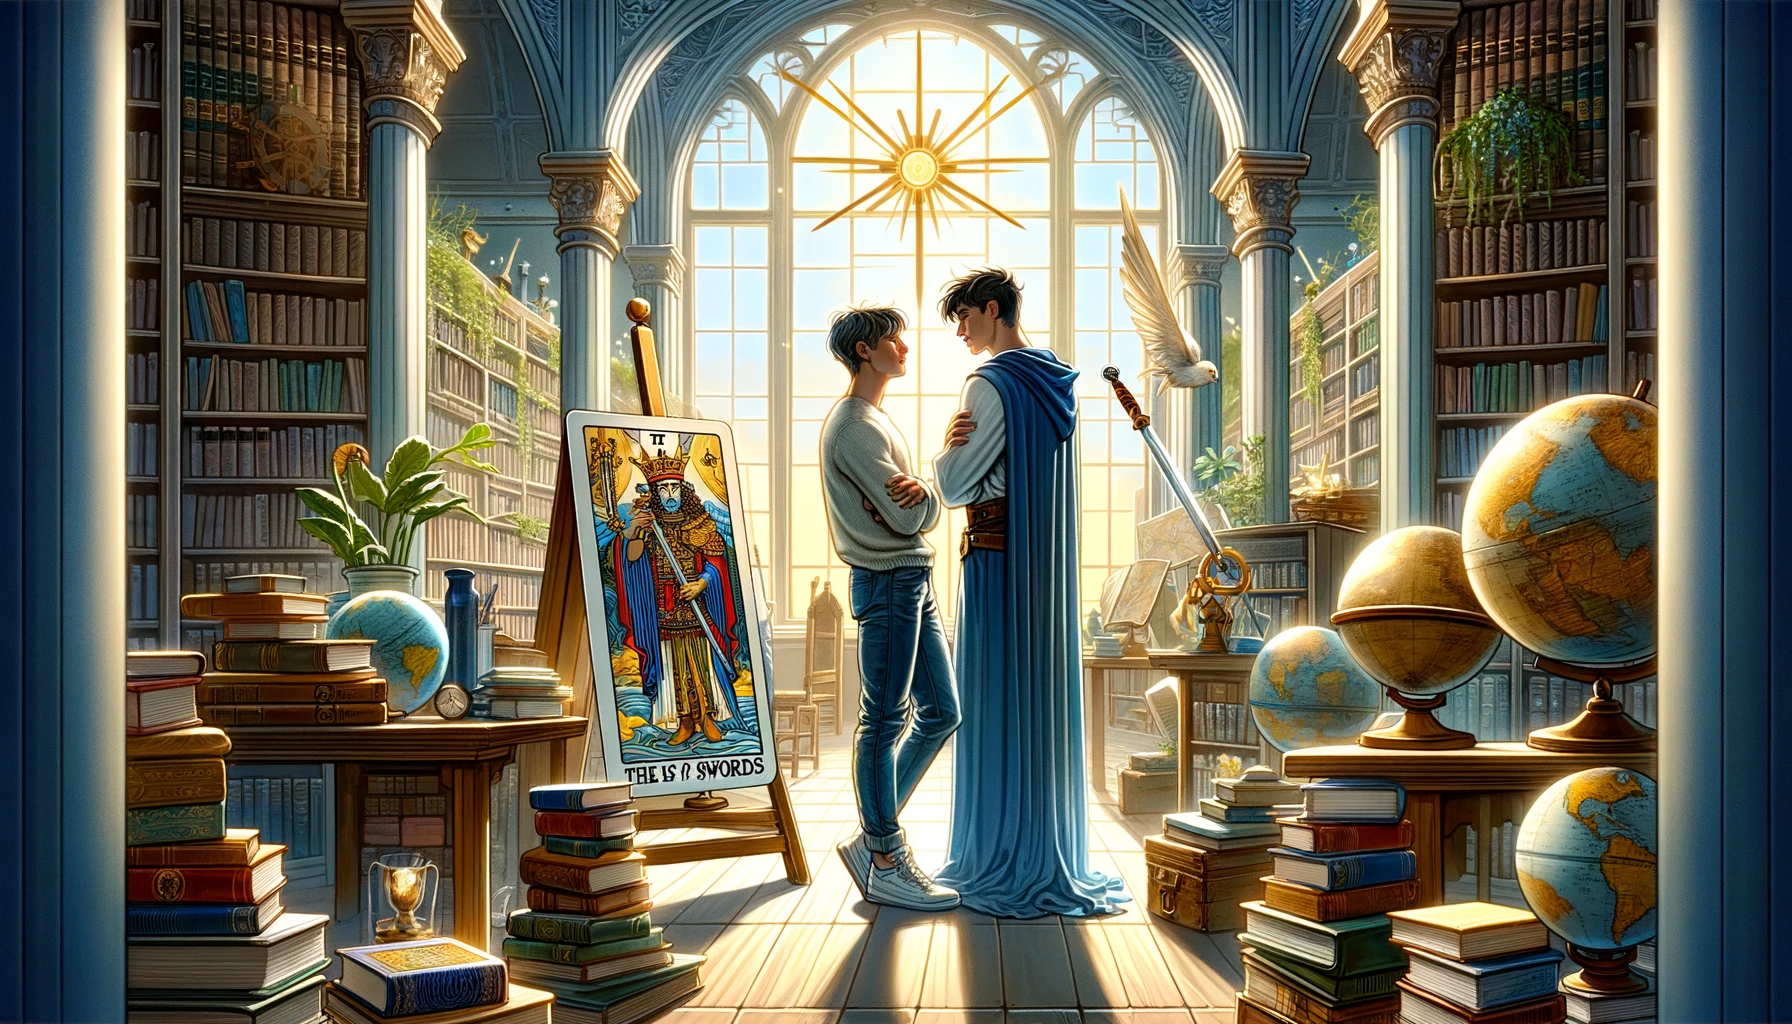 "The image depicts a couple engaged in deep conversation, symbolizing clear communication, intellectual compatibility, and honesty in relationships. It enriches the article by illustrating the strength and value of a partnership grounded in intellectual equality and mutual respect, within the context of a shared pursuit of knowledge and truth."